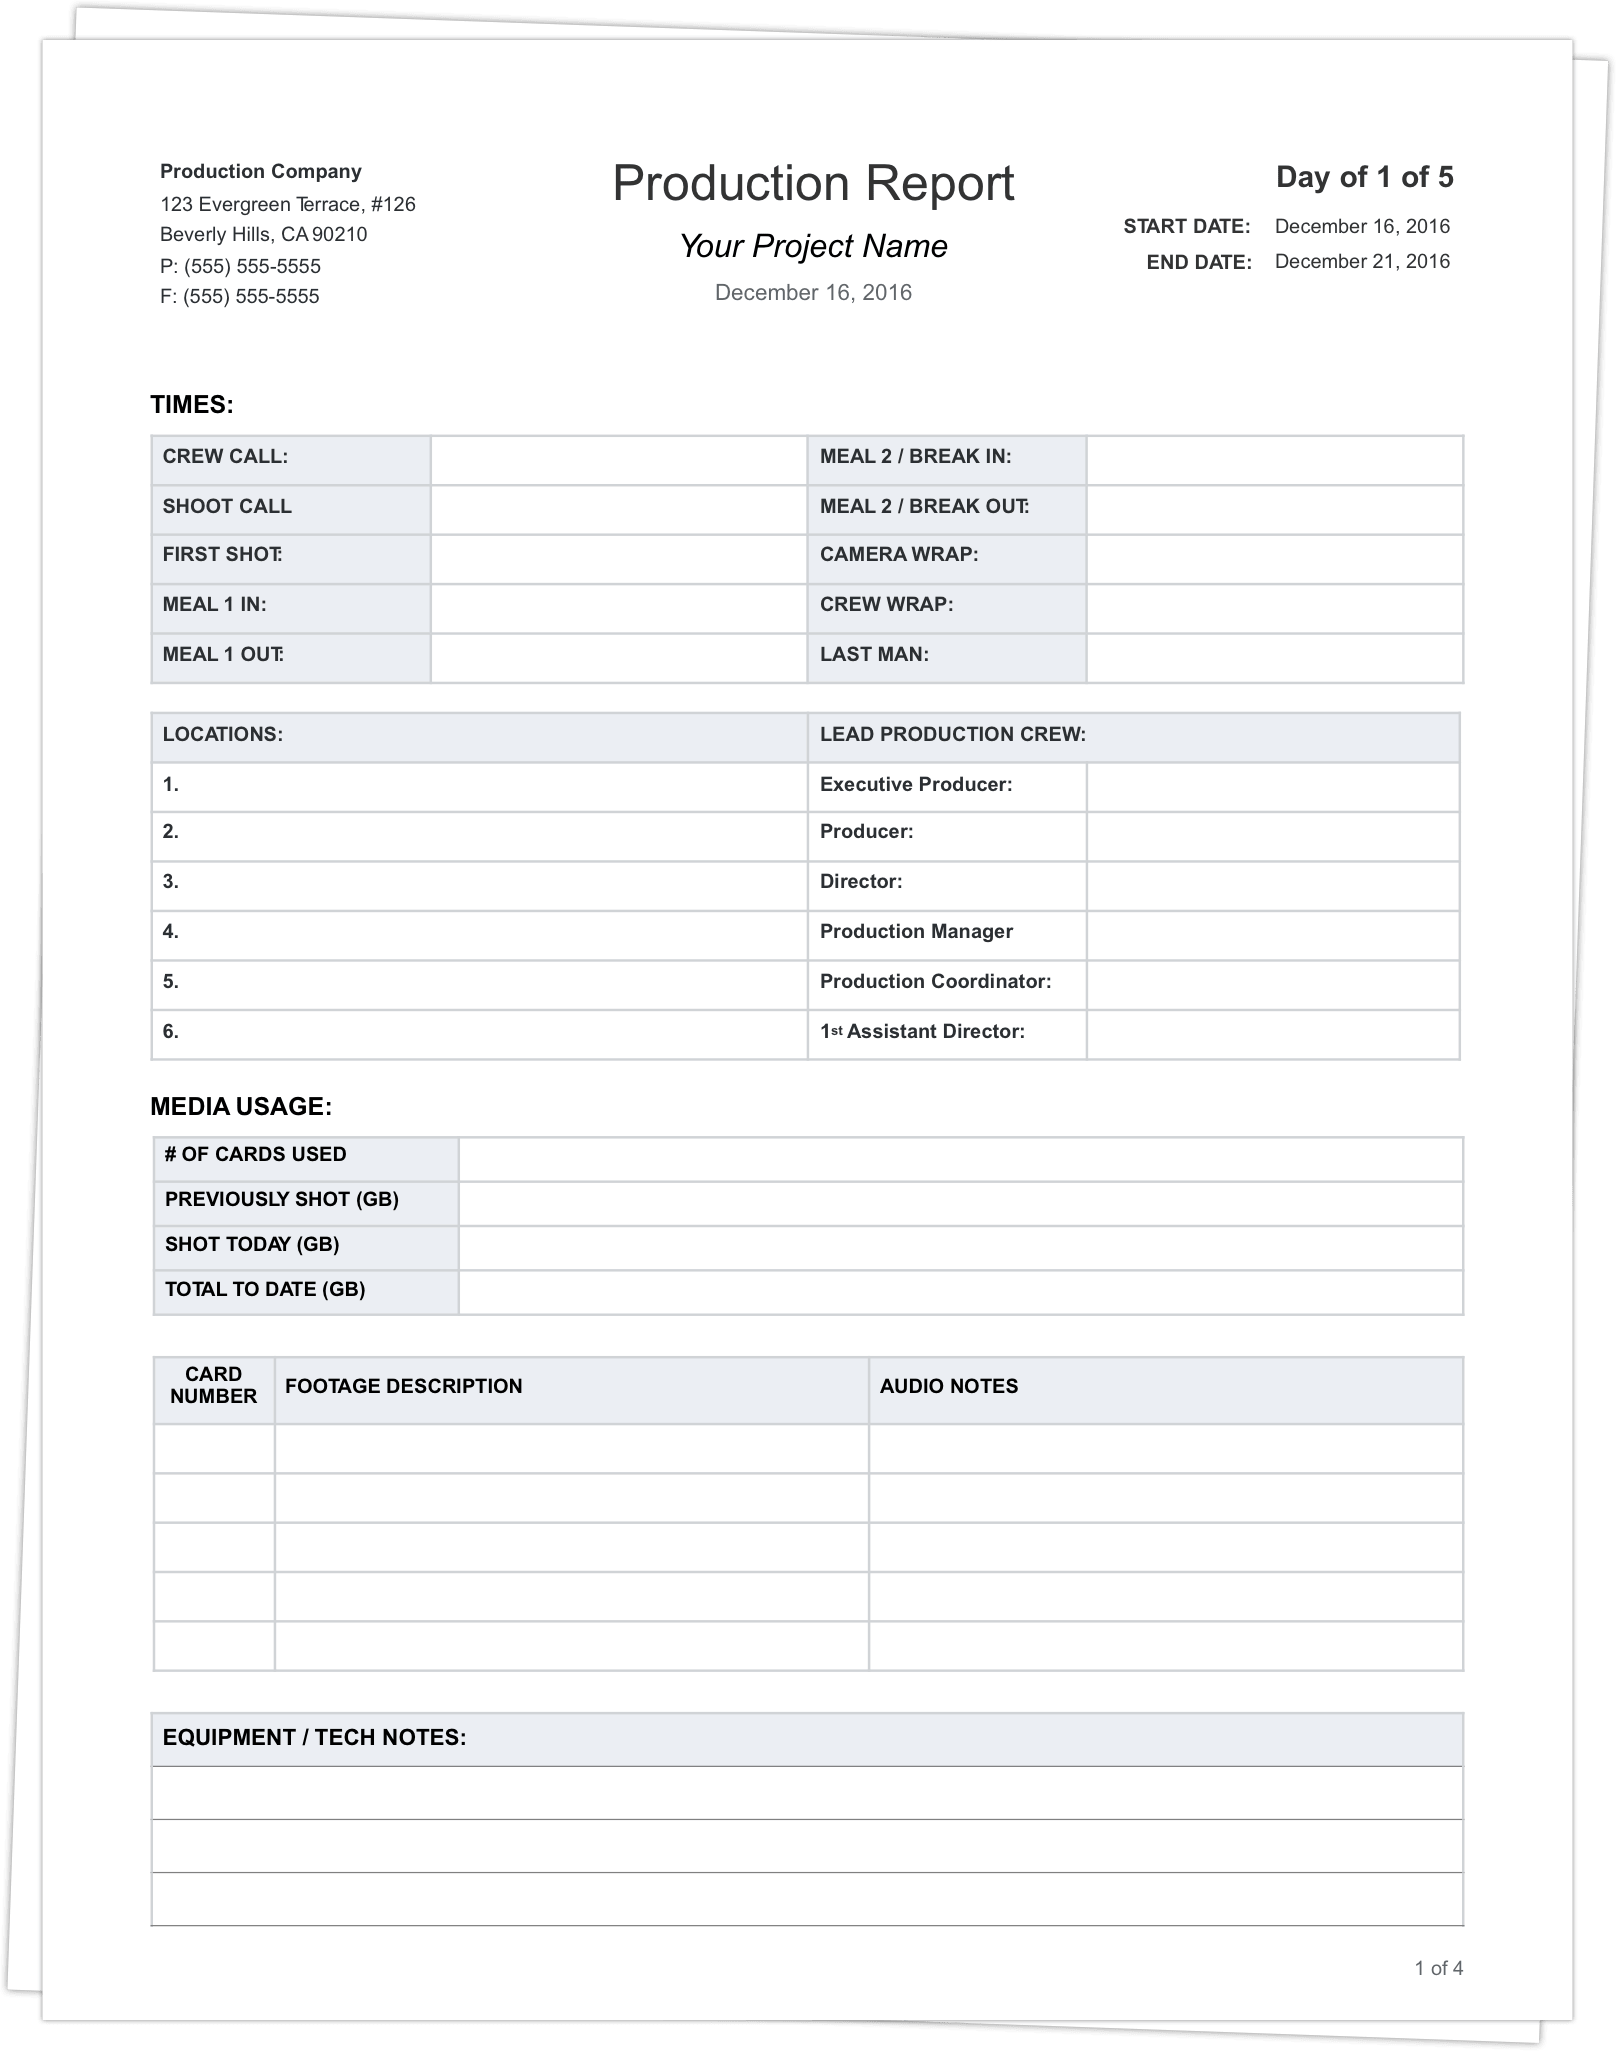 Daily Production Report Template - Stack - StudioBinder